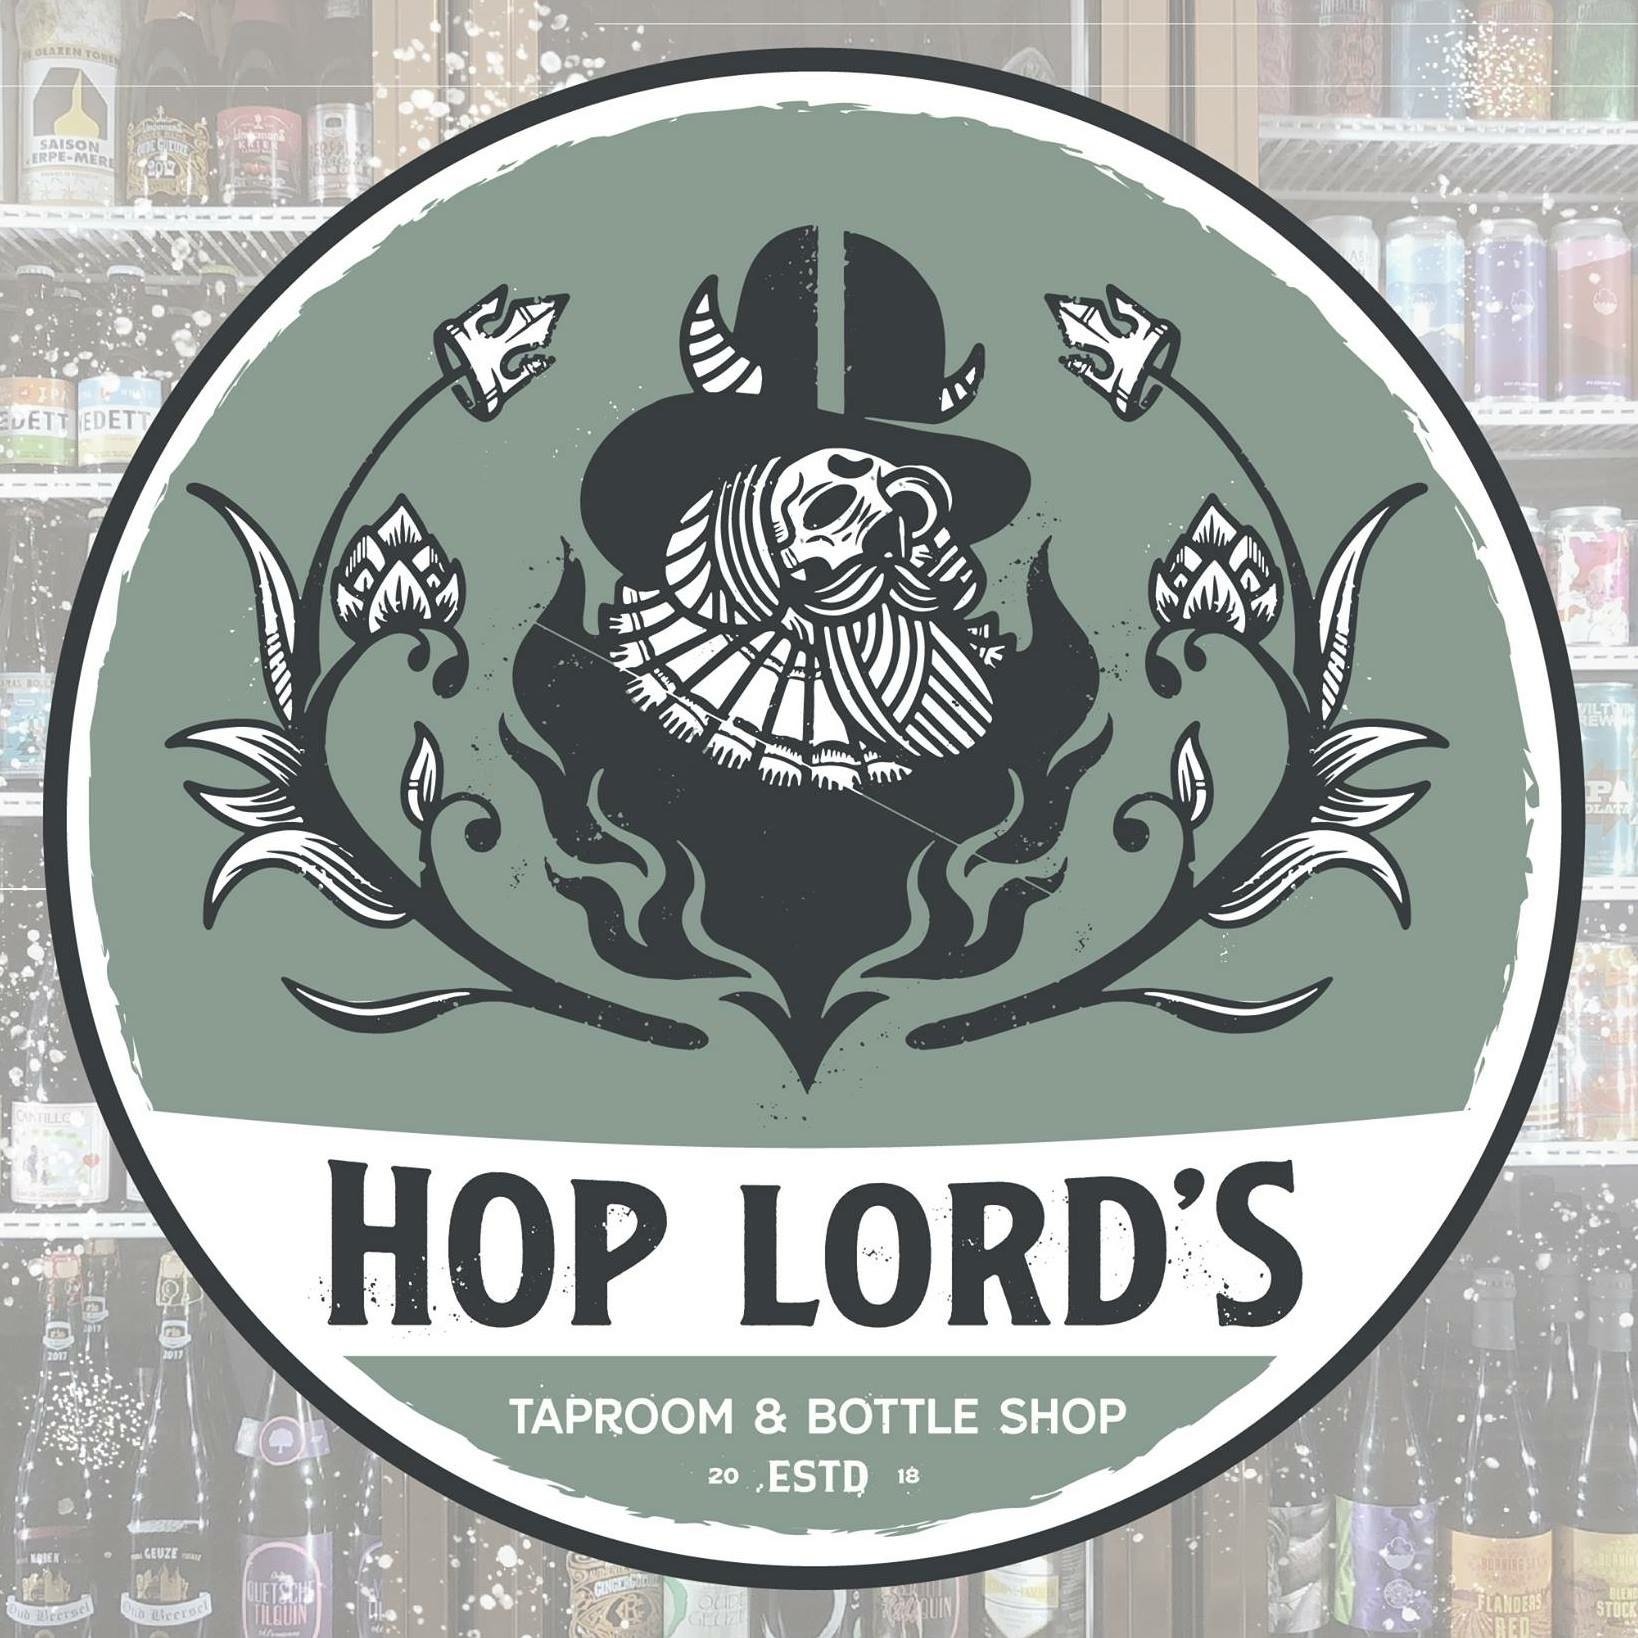 Logo of Hop Lord's